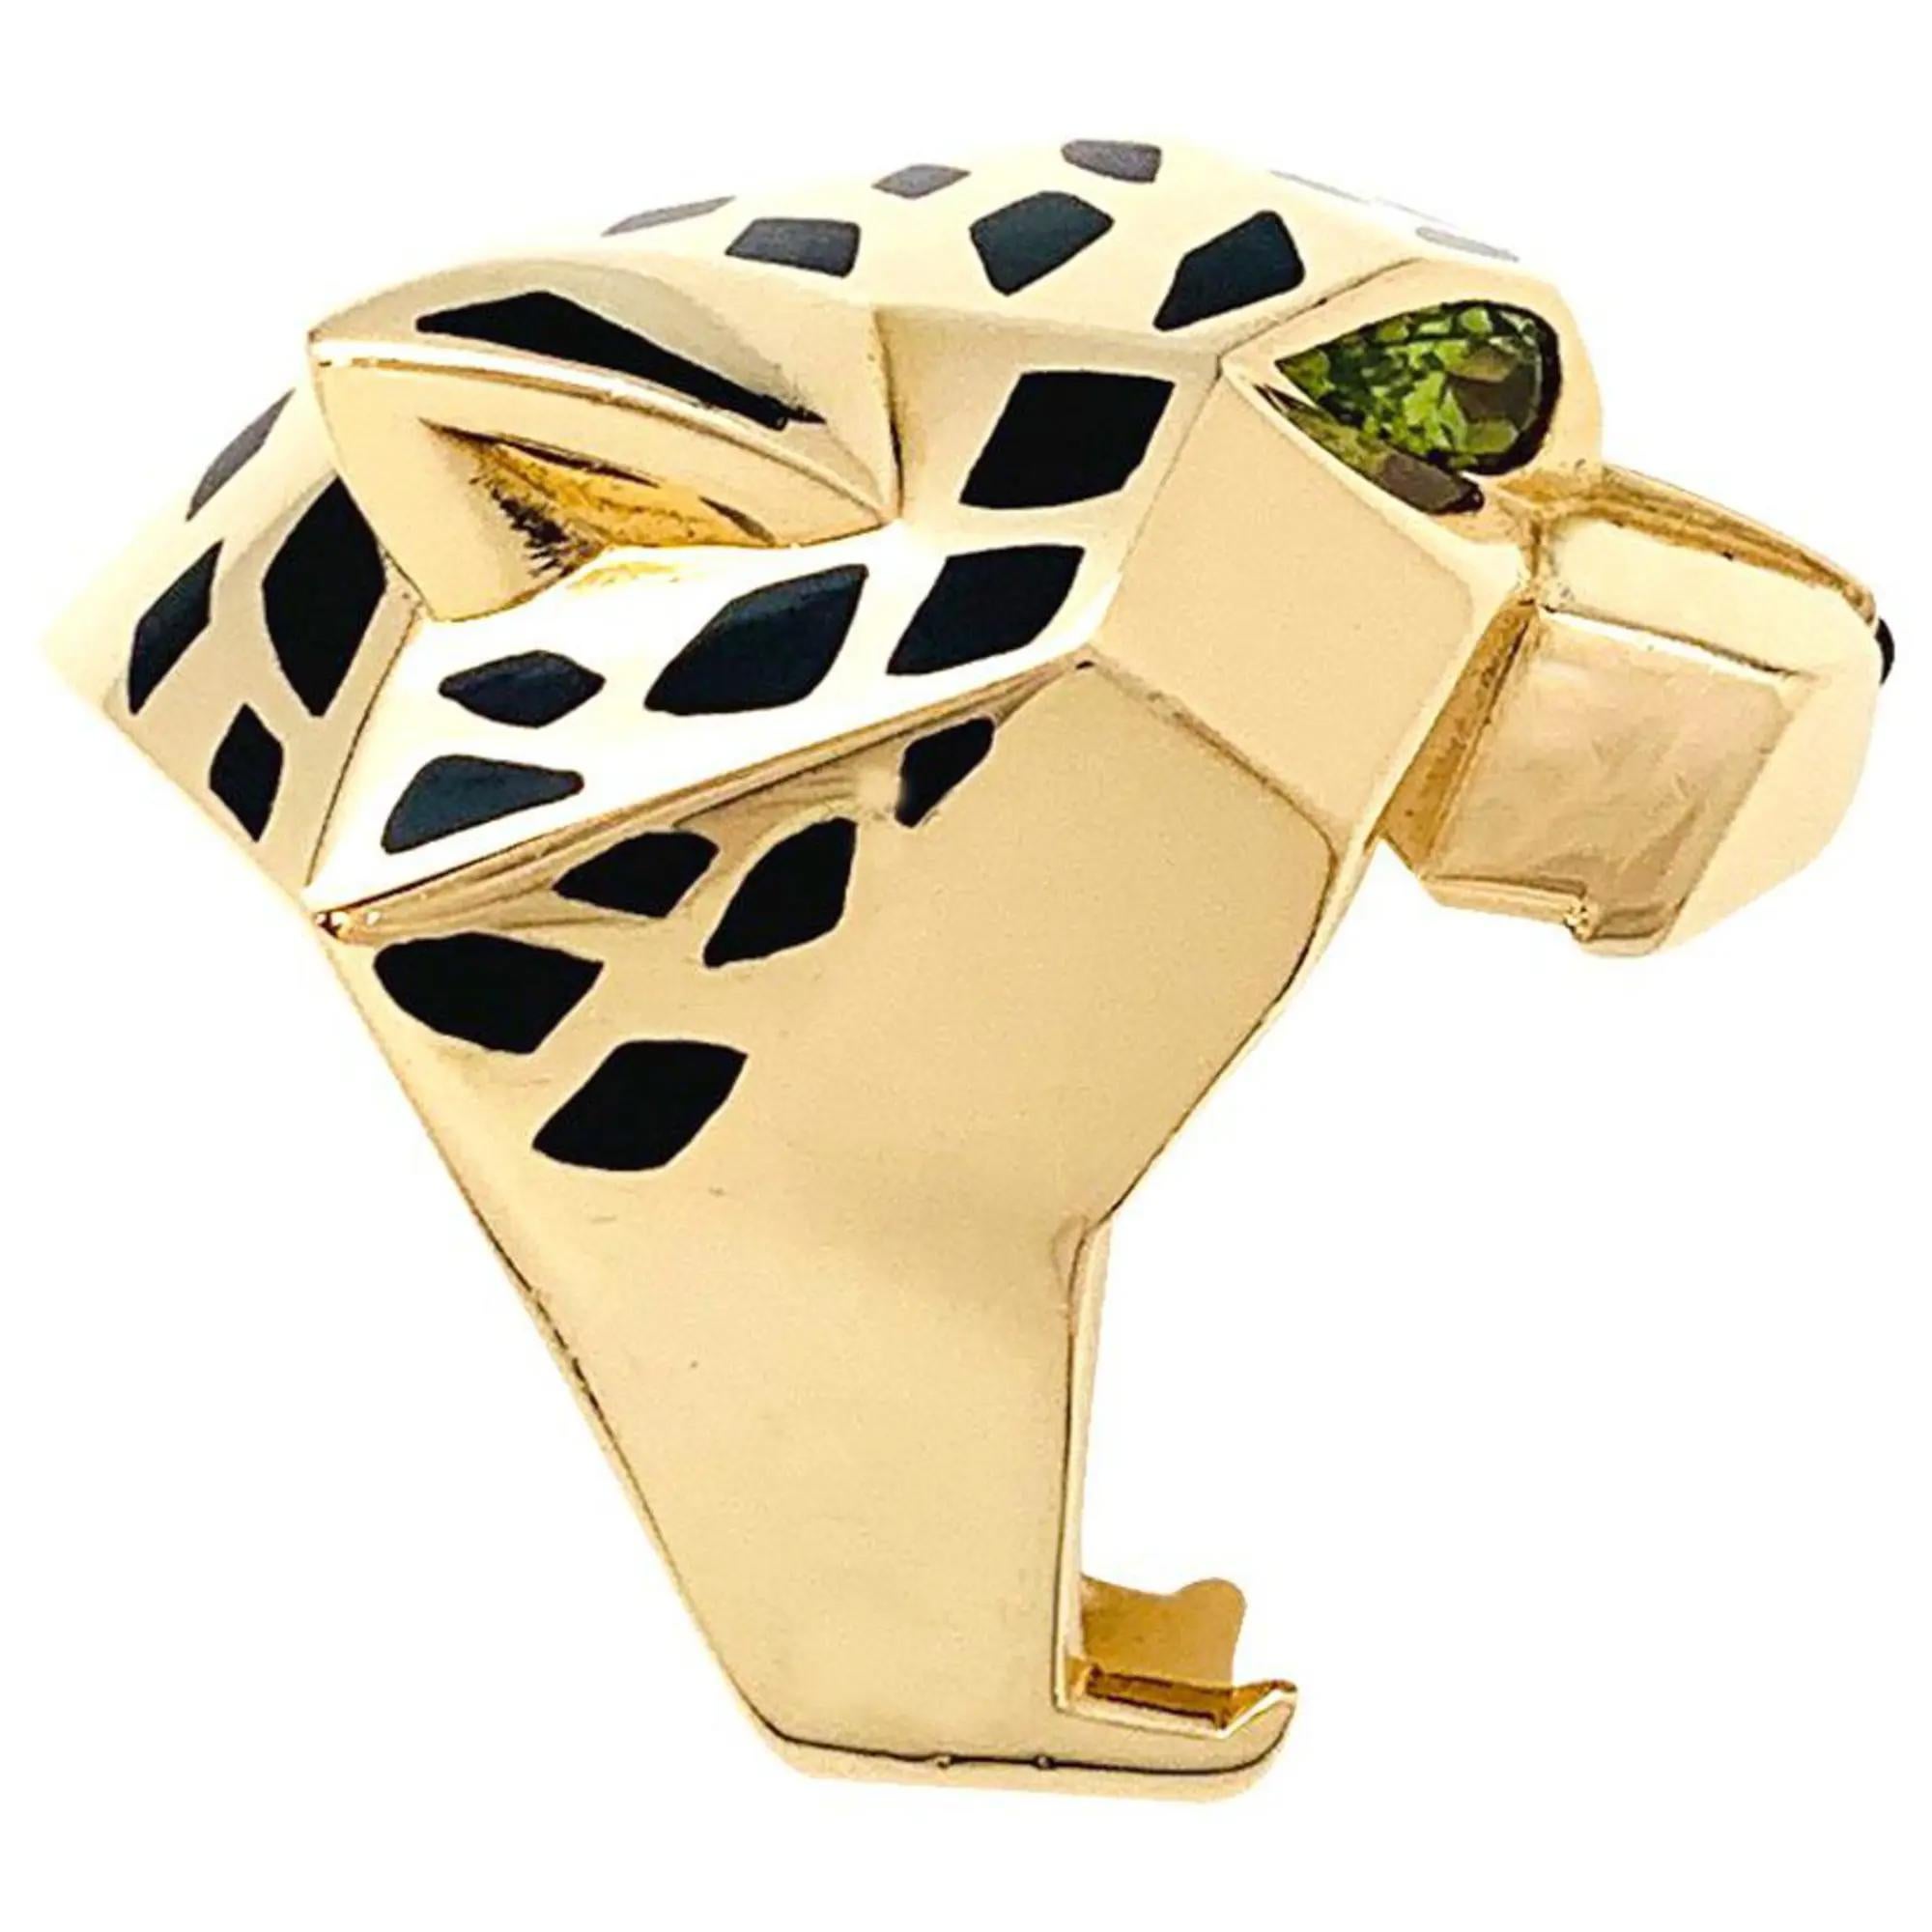 Cartier's Panthere de Cartier ring, 18K yellow gold set with black Lacquer, Peridots and Onyx. Panthere is the symbolic animal of Cartier, made its first appearance in the Maison's collections in 1914. Width of the pattern according to metrics: 29.7